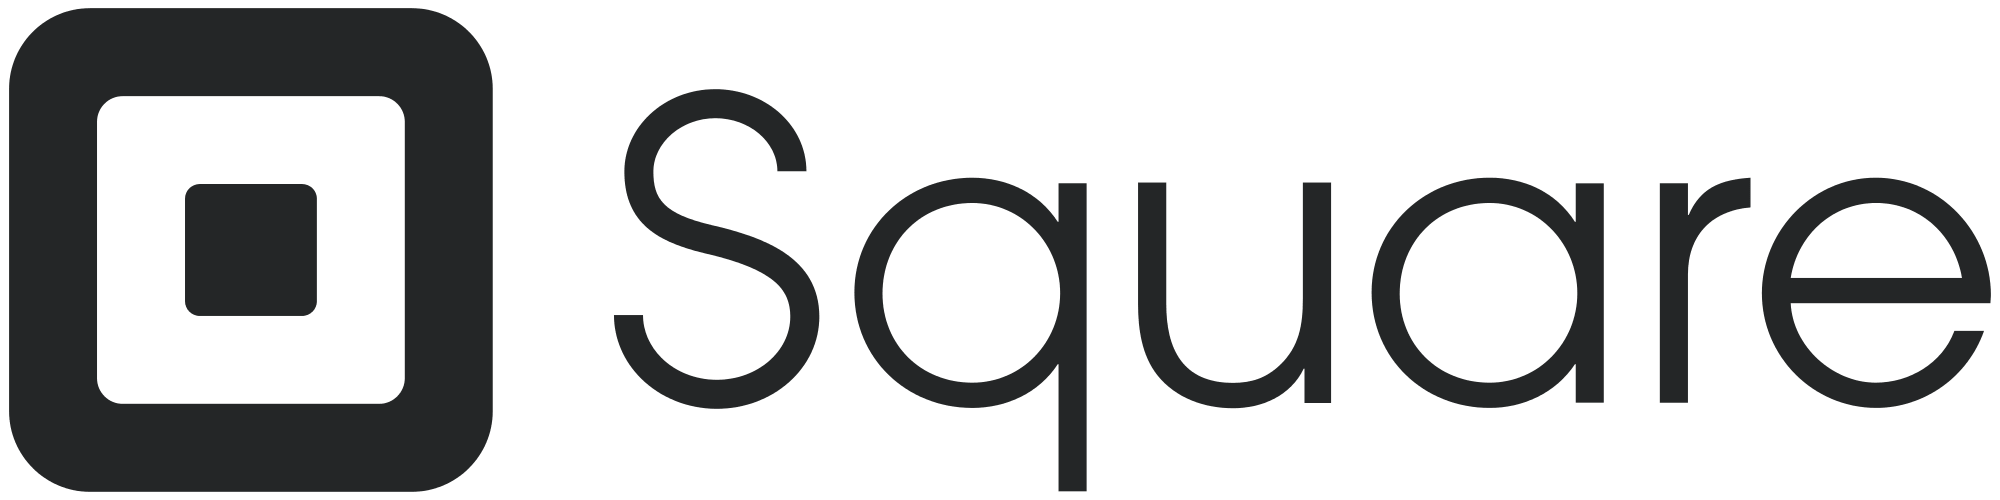 Square Reader Logo - Square | Definitions and Overview | HeroPay